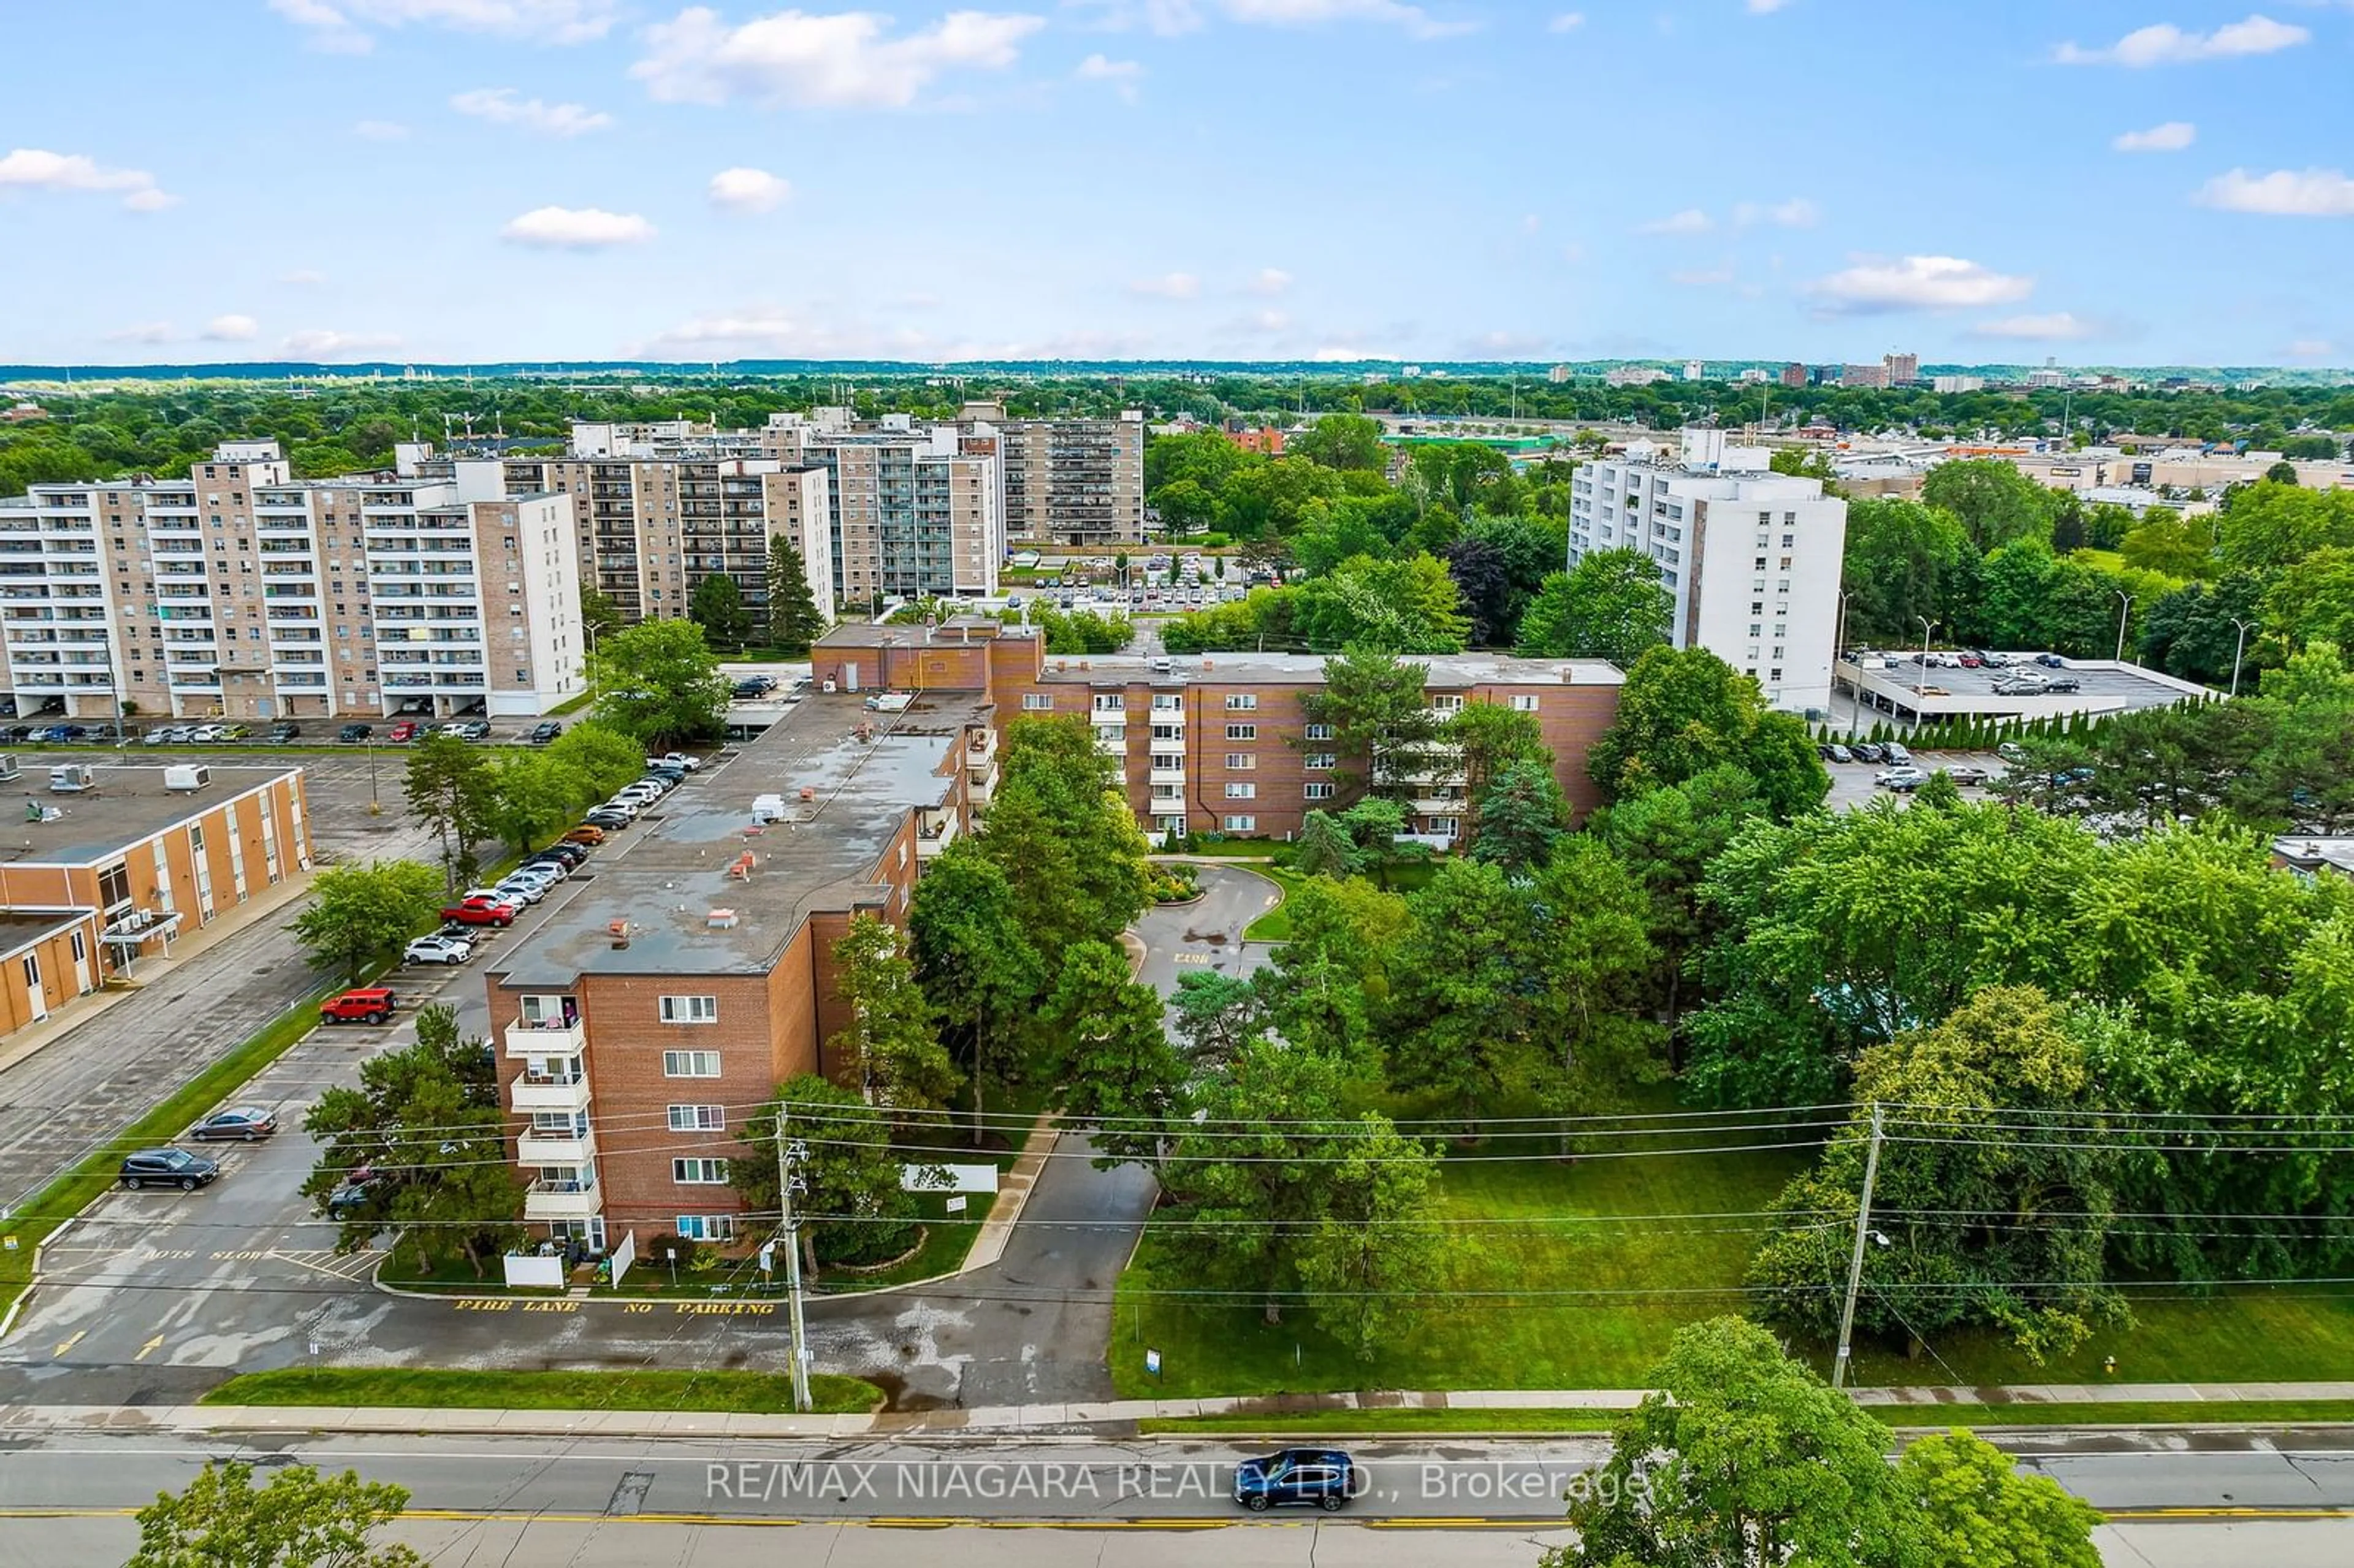 Lakeview for 198 Scott St #110, St. Catharines Ontario L2N 5T3